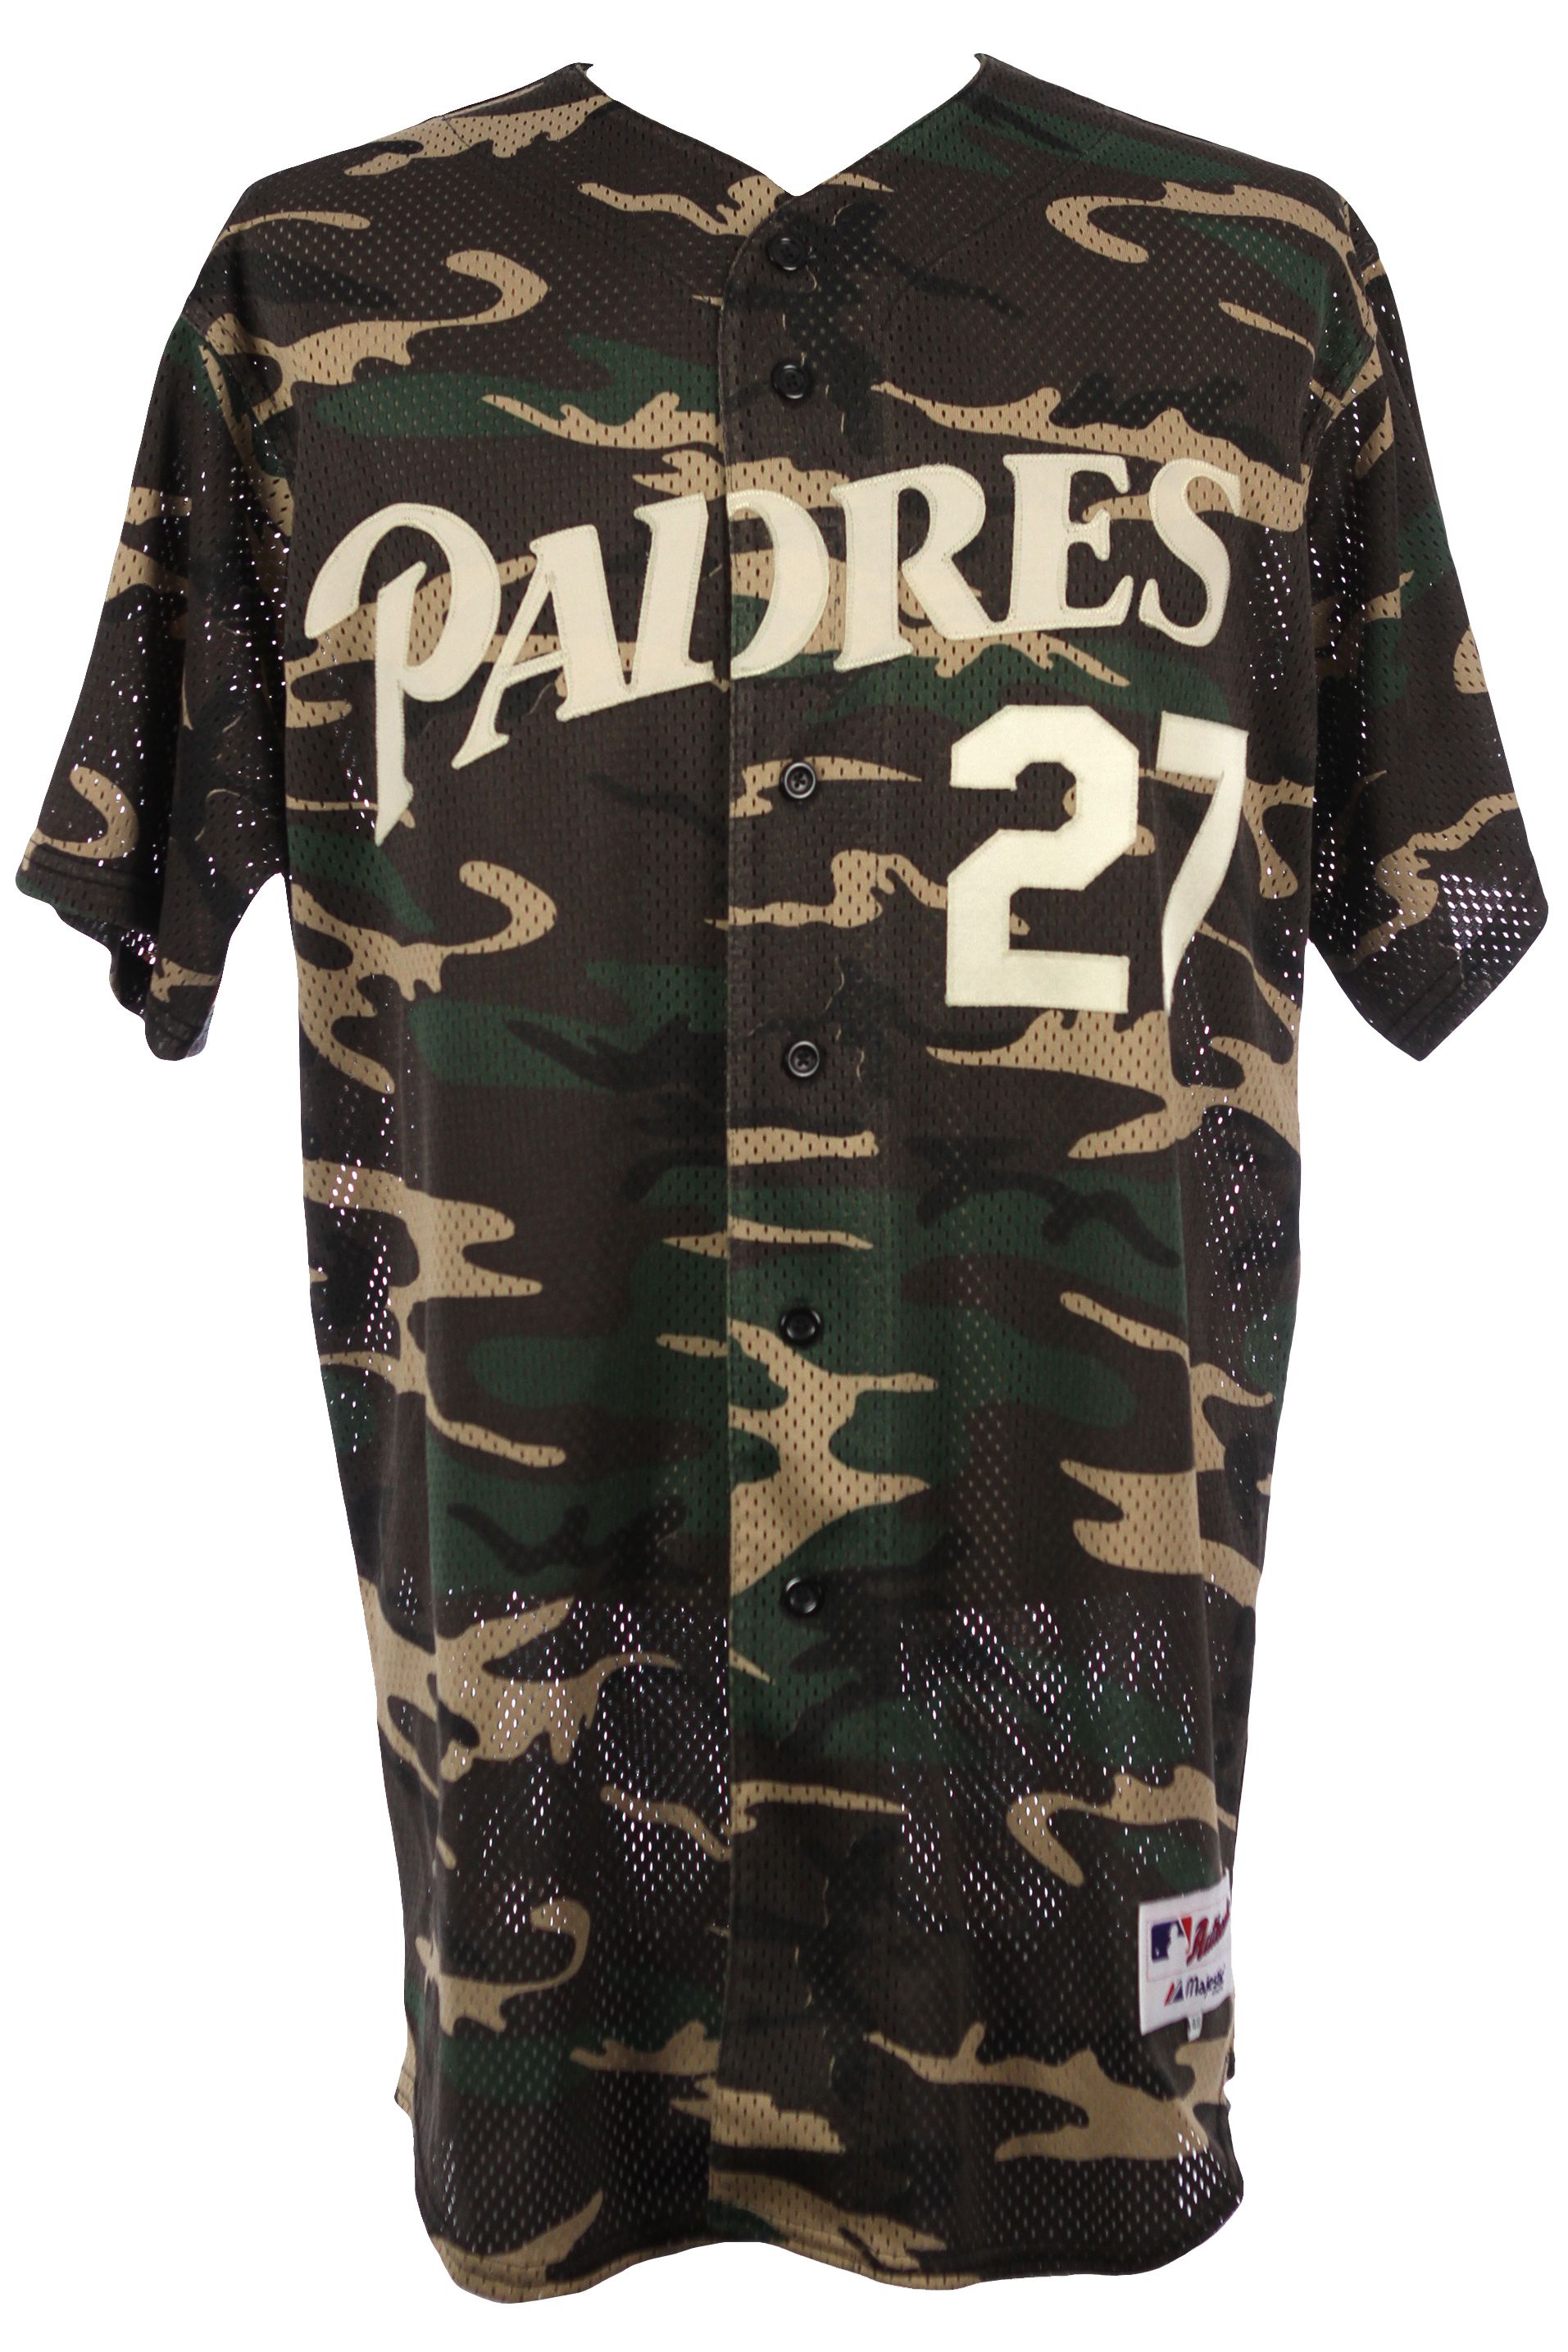 padres camouflage uniforms